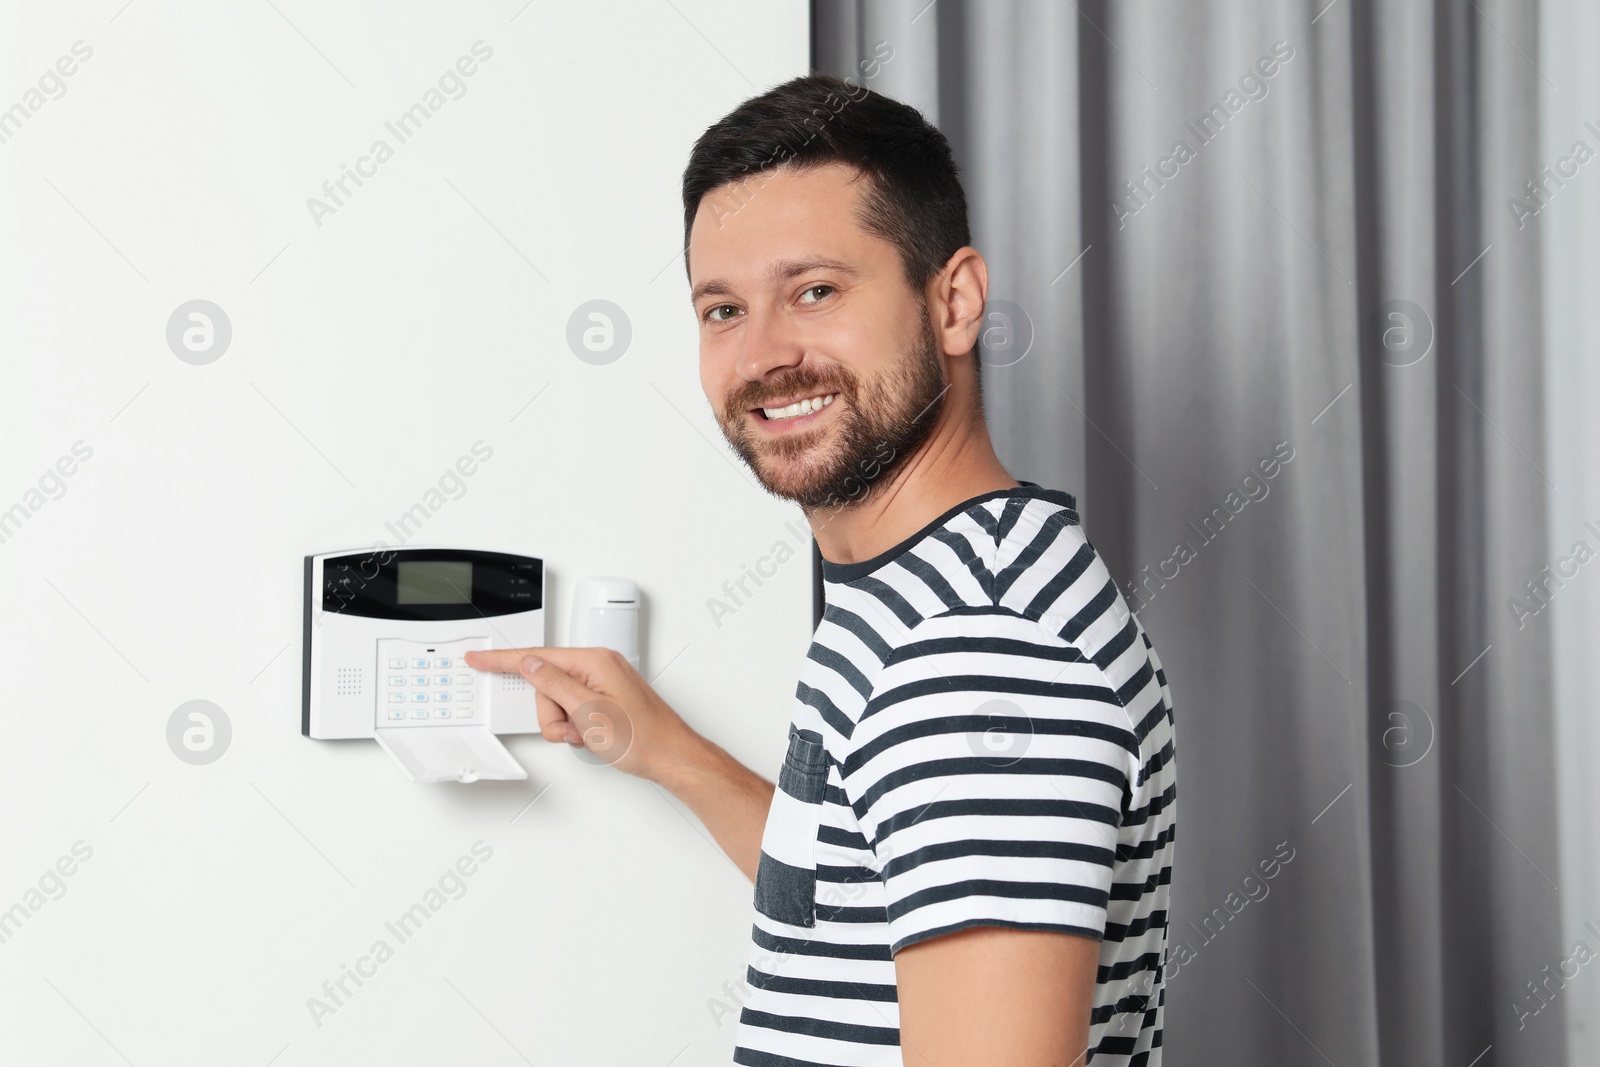 Photo of Man entering code on home security system indoors